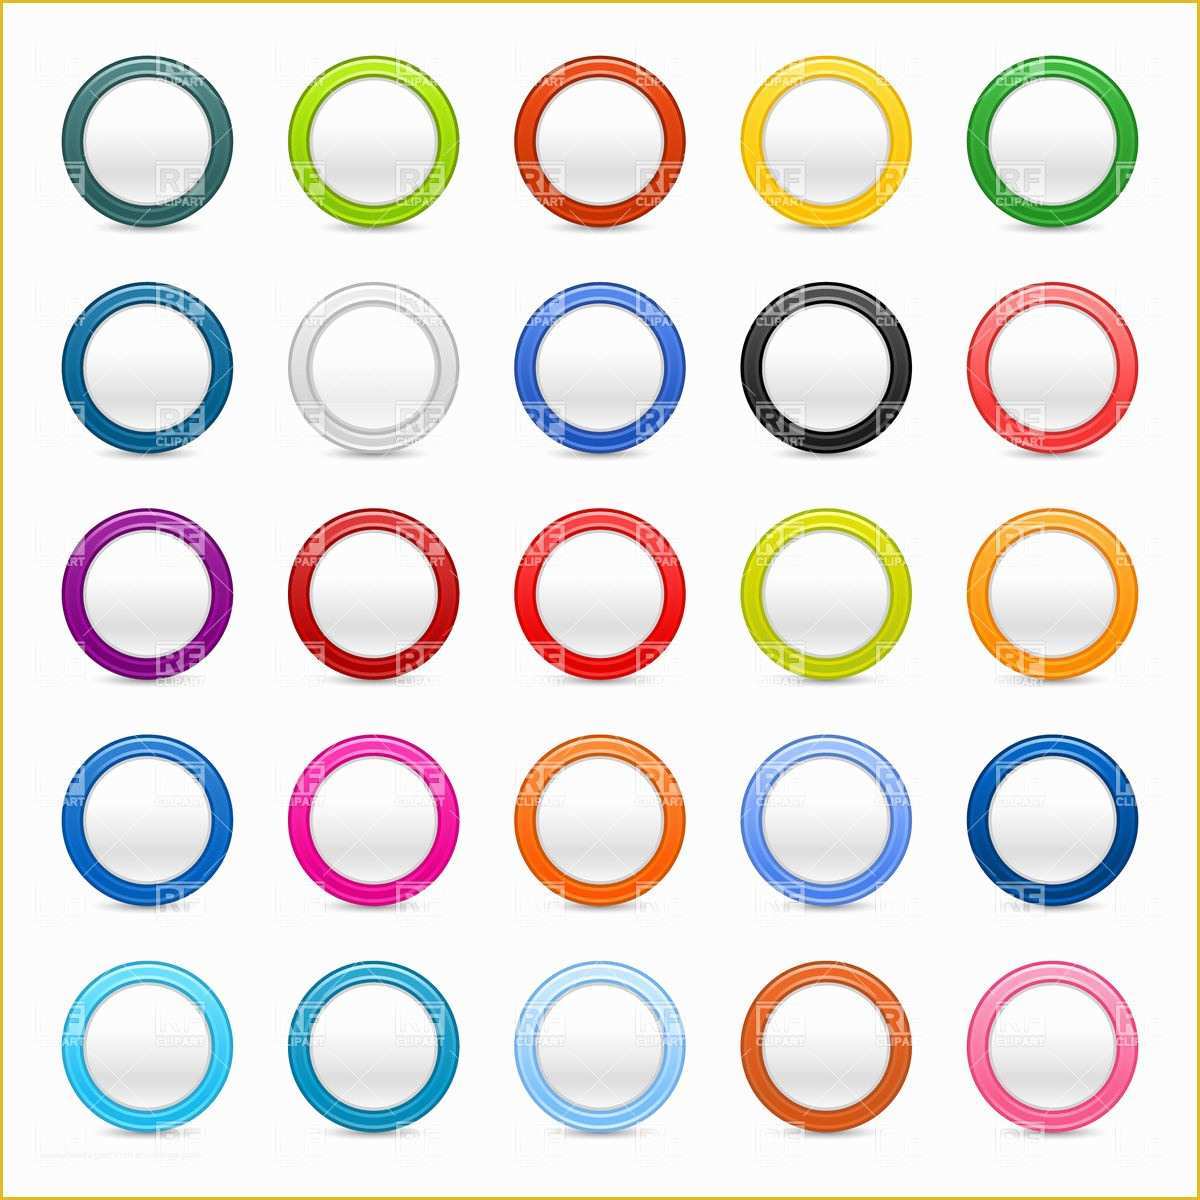 Free button Templates Of Round Badge Clip Art Website – Cliparts